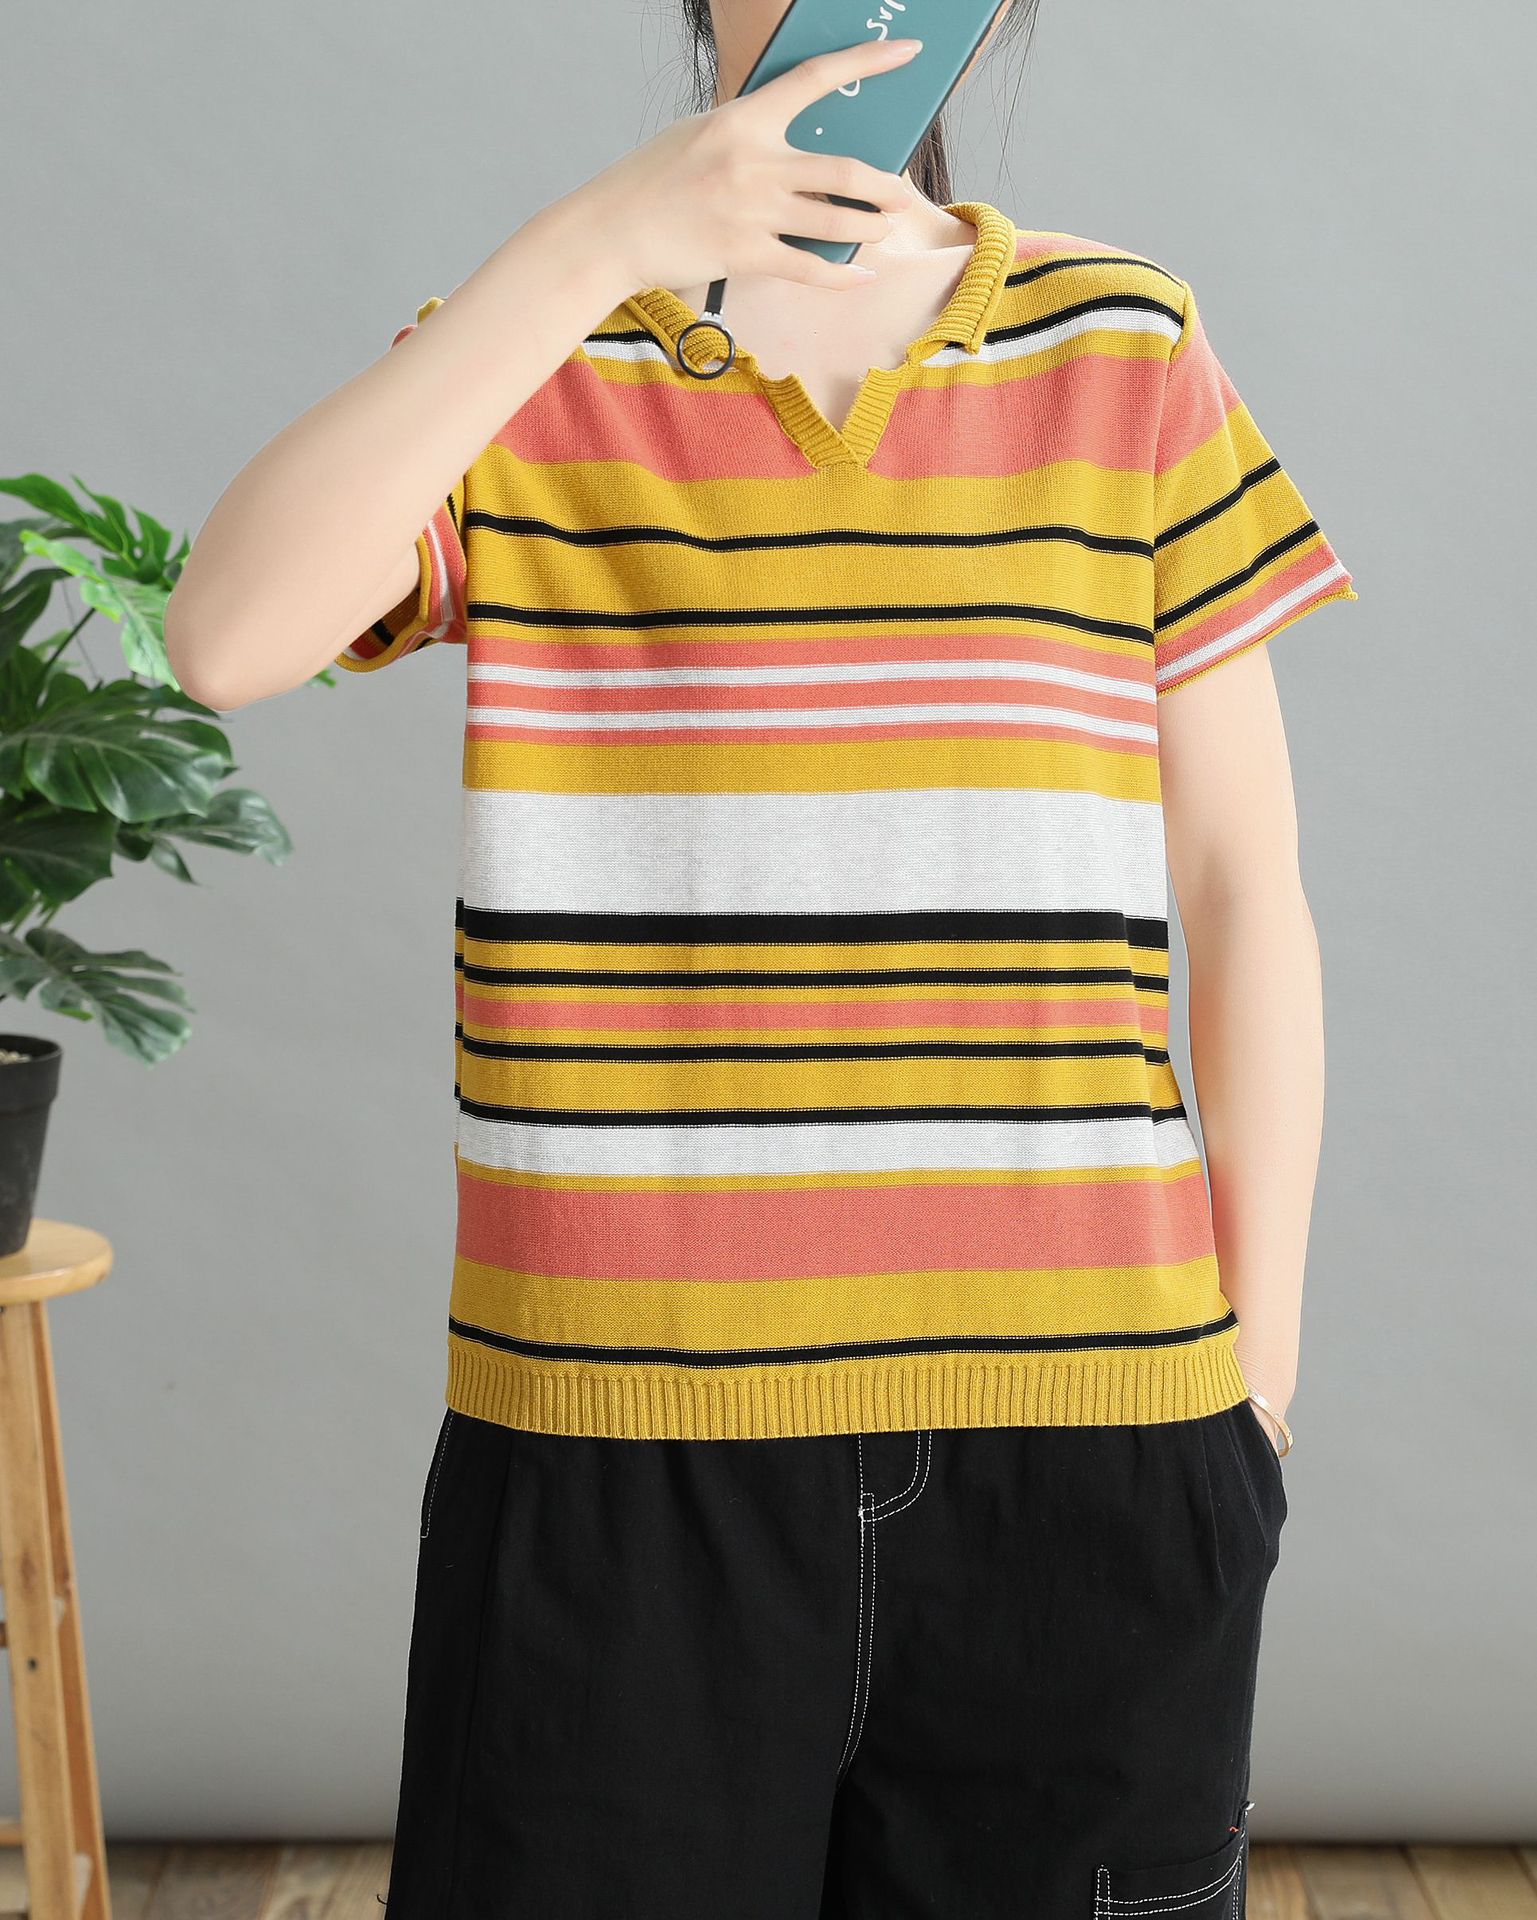 2020 summer new women's loose knit sweater female striped V collar light decoction head large size T-shirt